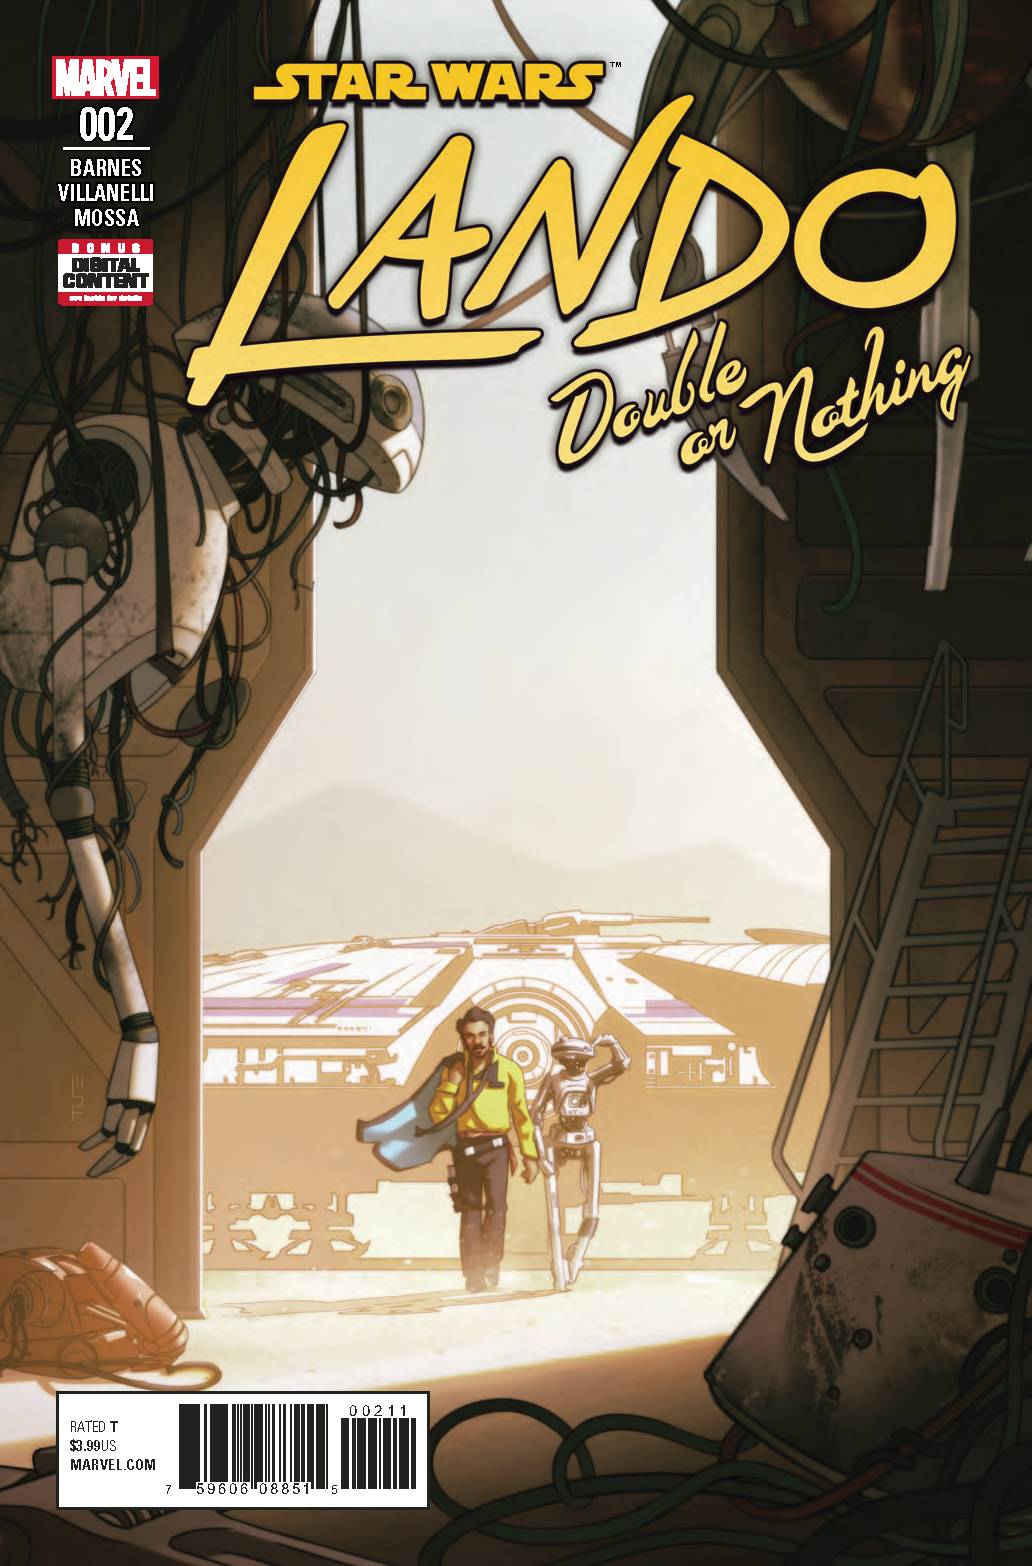 STAR WARS LANDO DOUBLE OR NOTHING #2 A (OF 5) Scott Forbes Rodney Barnes (06/27/2018) Marvel